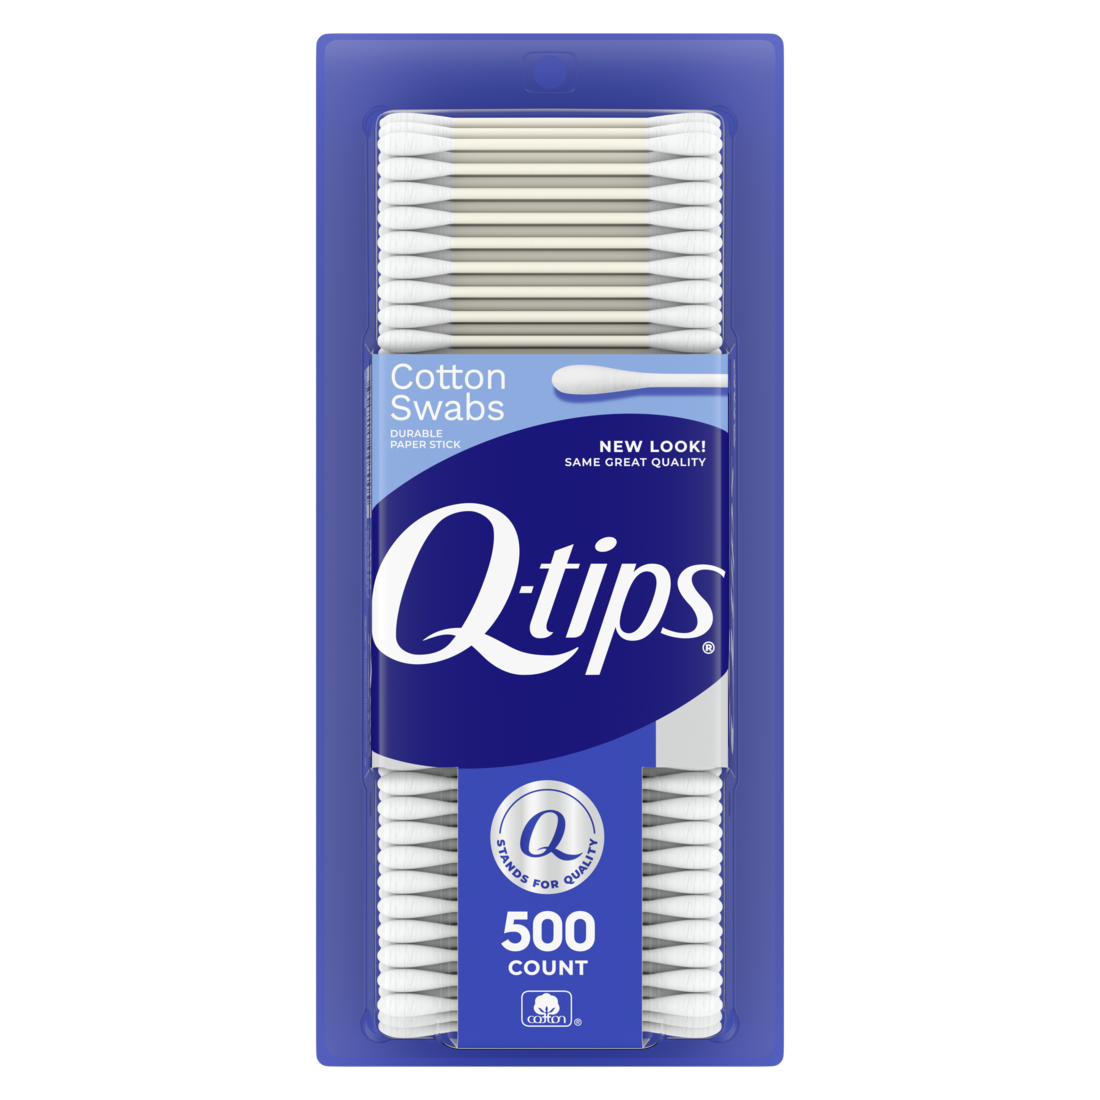 Q-tips Cotton Swabs Original for Hygiene and Beauty Care, Made with 100% Cotton 500 Count - image 1 of 8